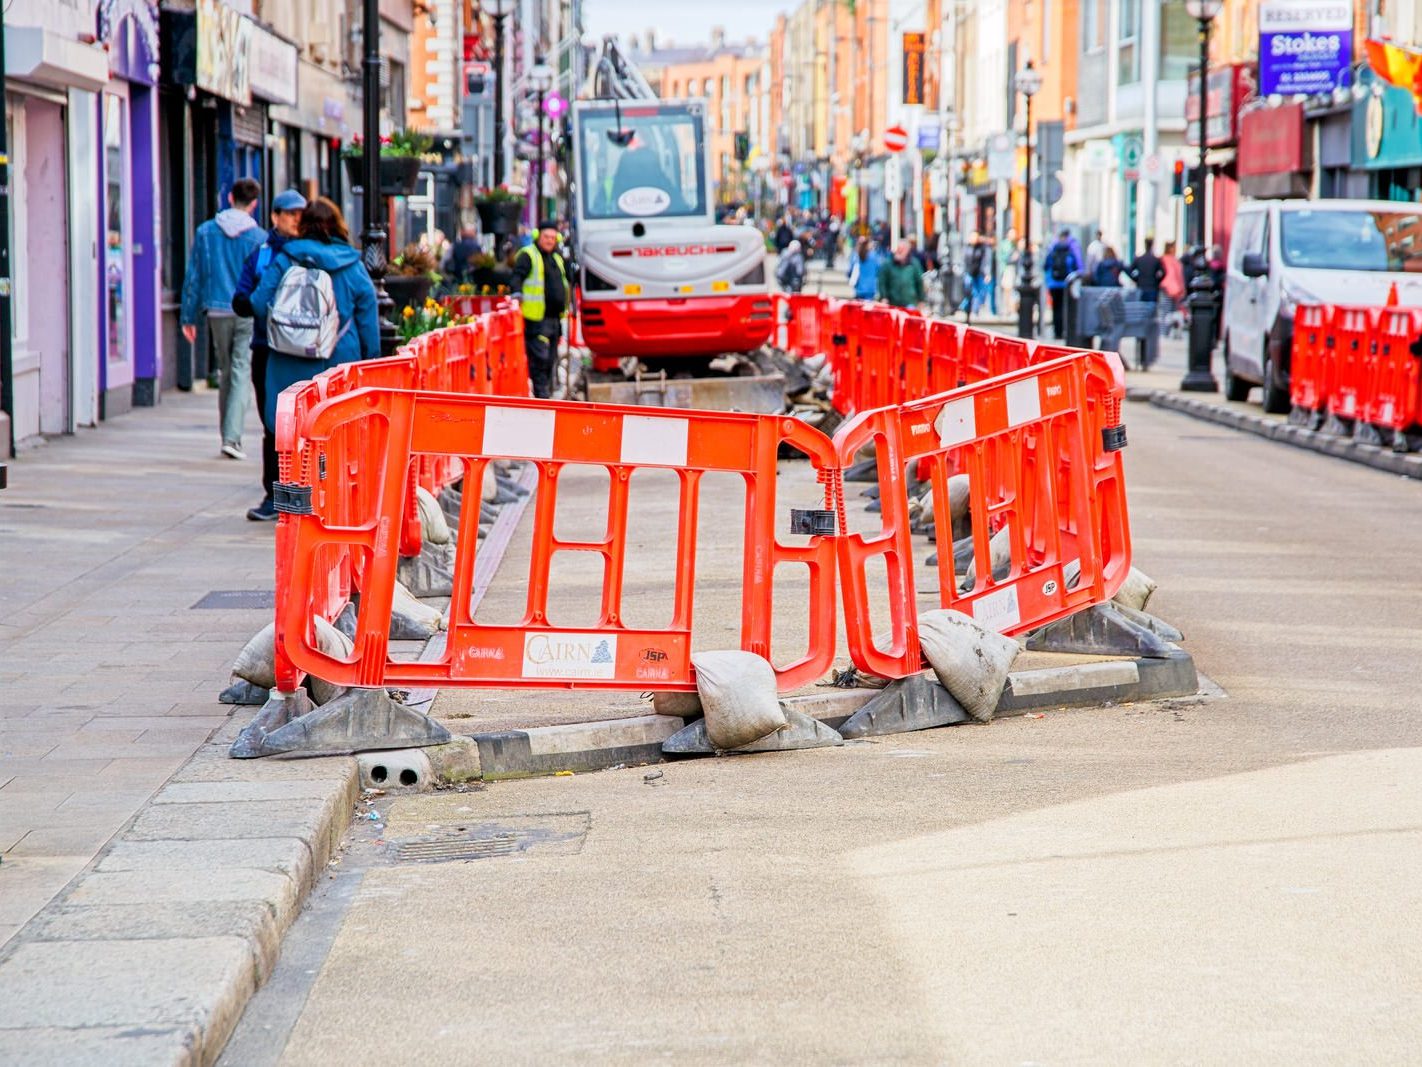 CAPEL STREET [THE RECONFIGURATION WORK HAS BEGUN AT THE LIFFEY END OF THE STREET]-223747-1